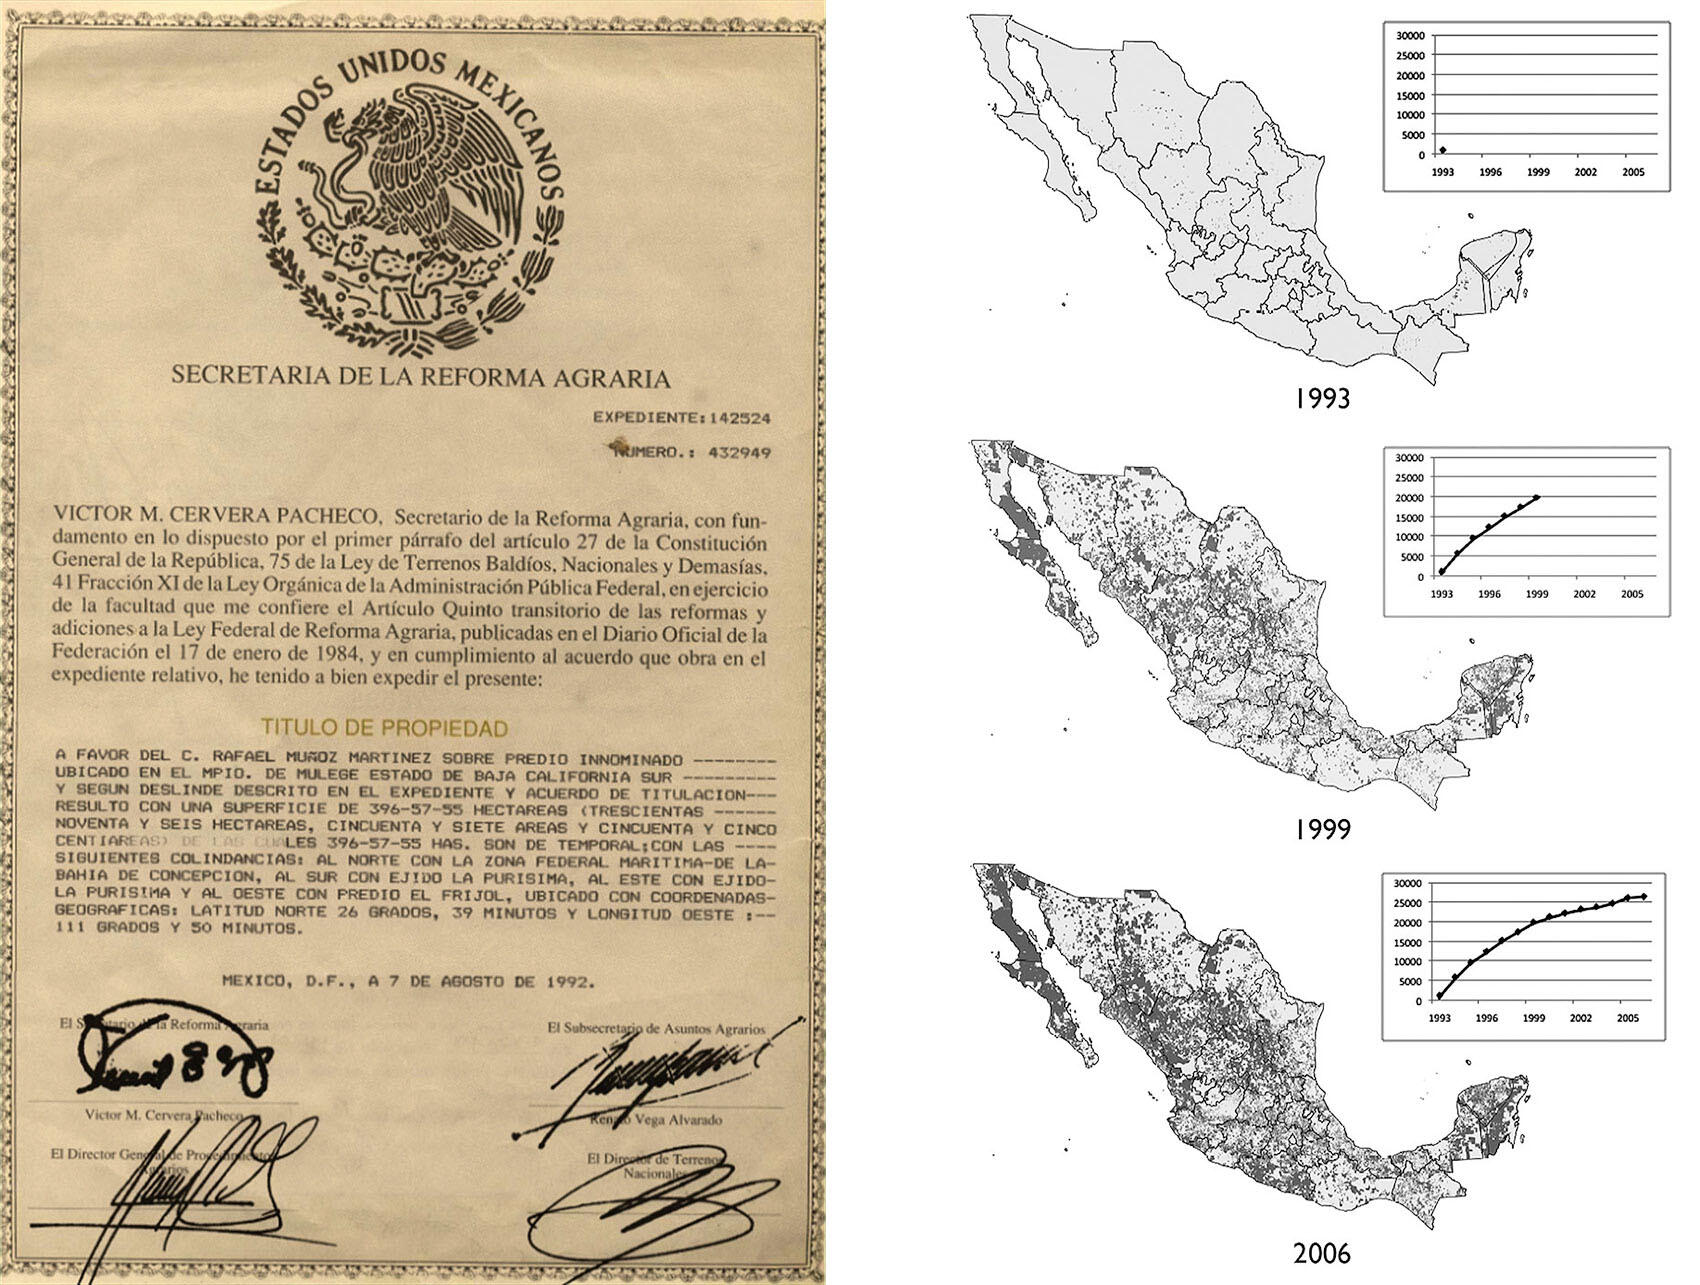  Maps show the spread of ejido land certification under Procede. (Images courtesy of Alain de Janvry.)